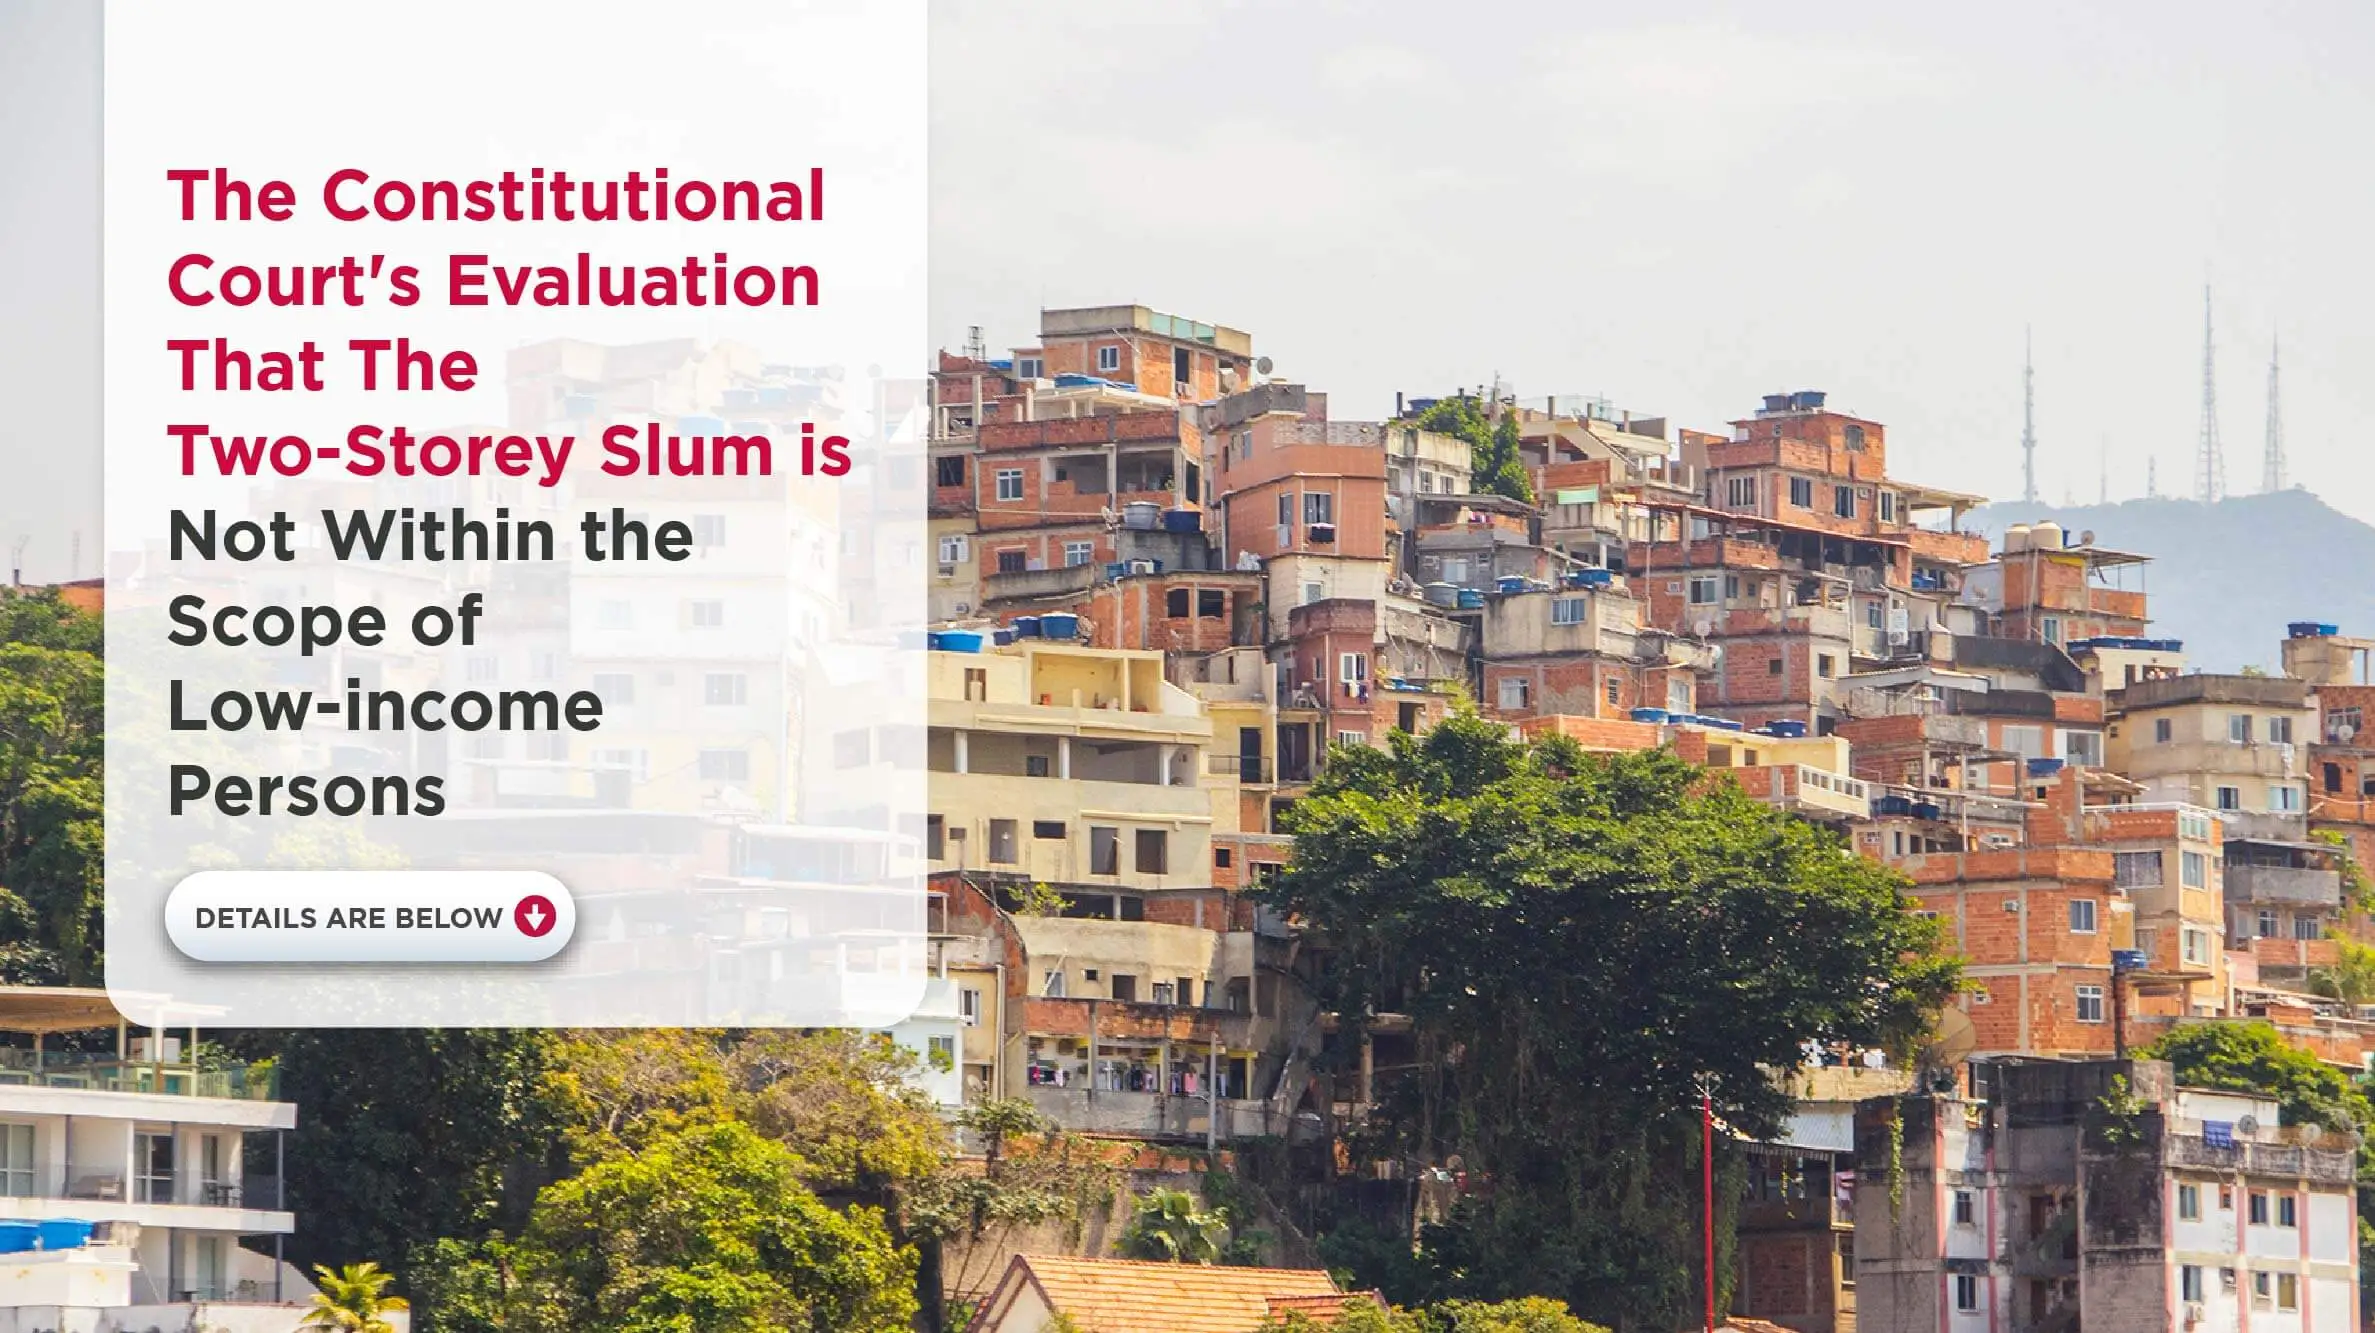 The Constitutional Courts Evaluation That The Two-Storey Slum is Not Within The Scope of Low-income Persons